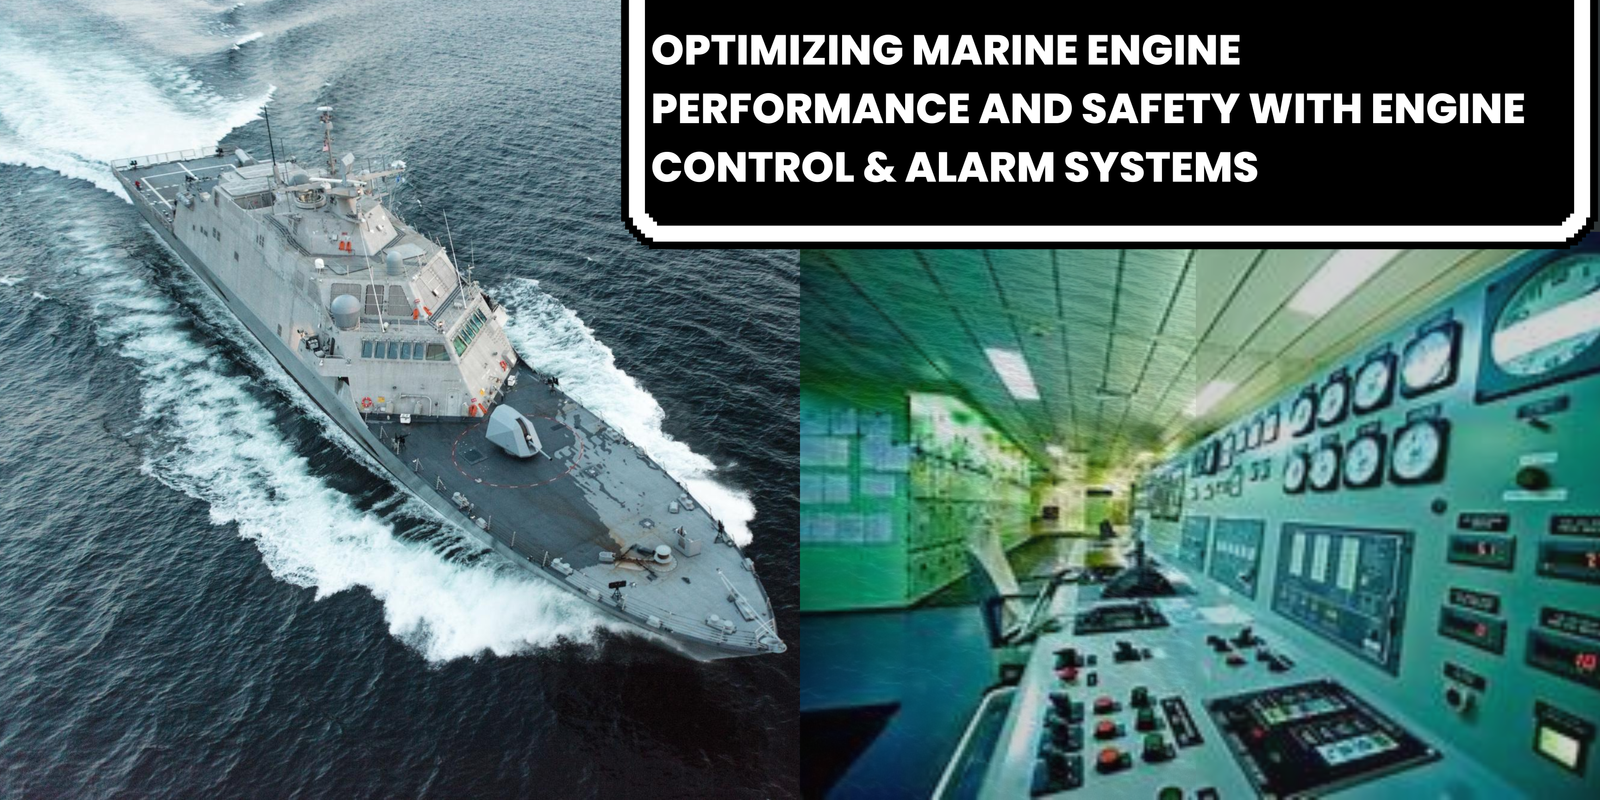 Optimizing Marine Engine Performance and Safety with Engine Control & Alarm Systems